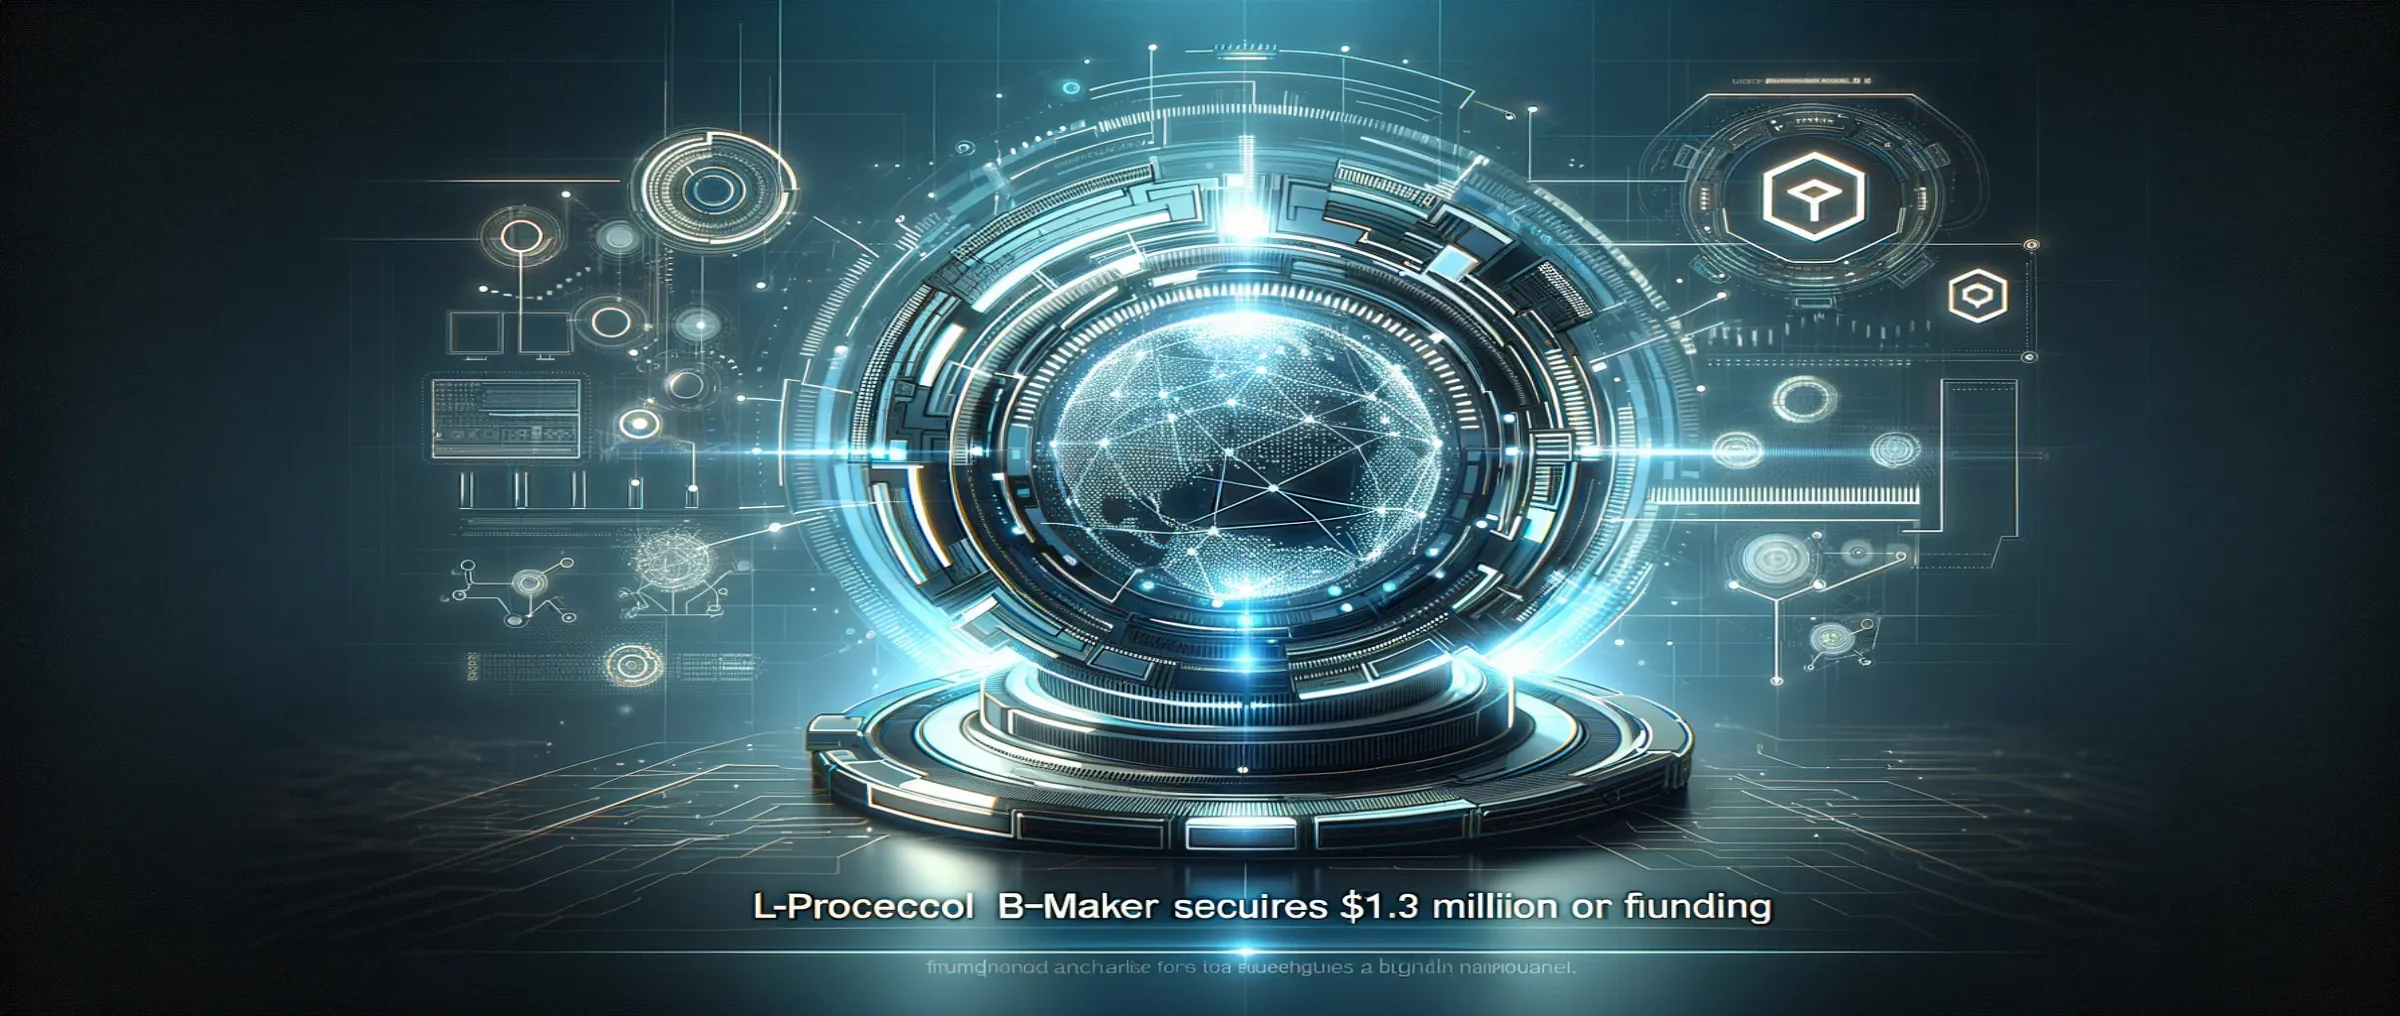 Bmaker's L2 protocol has attracted $1.2 million in investments